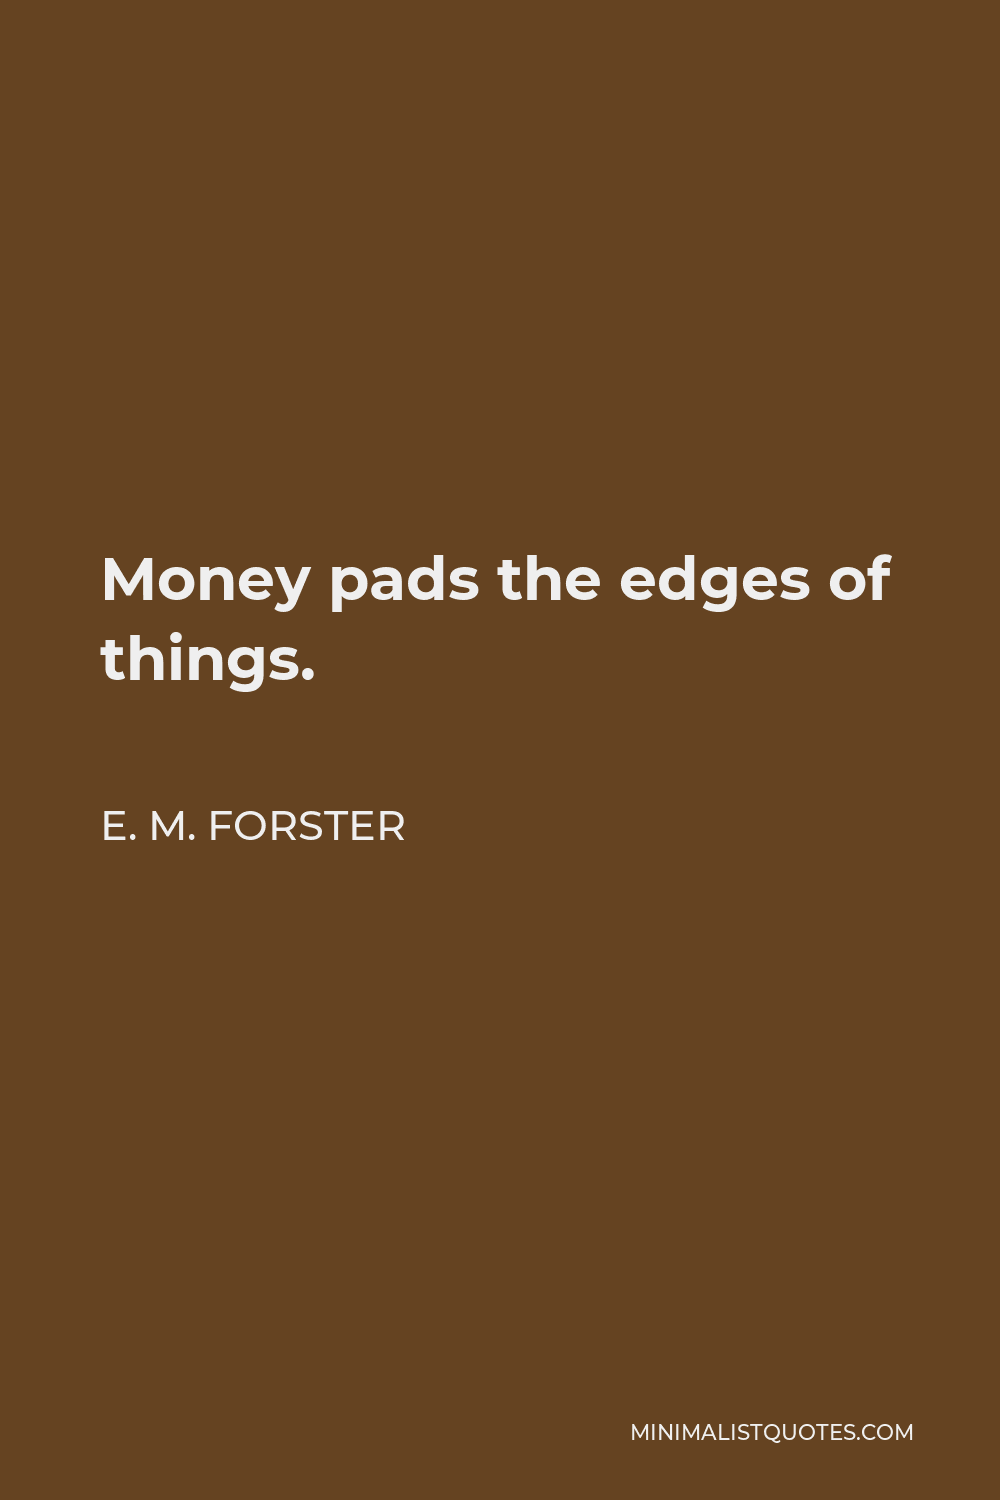 E. M. Forster Quote - Money pads the edges of things.